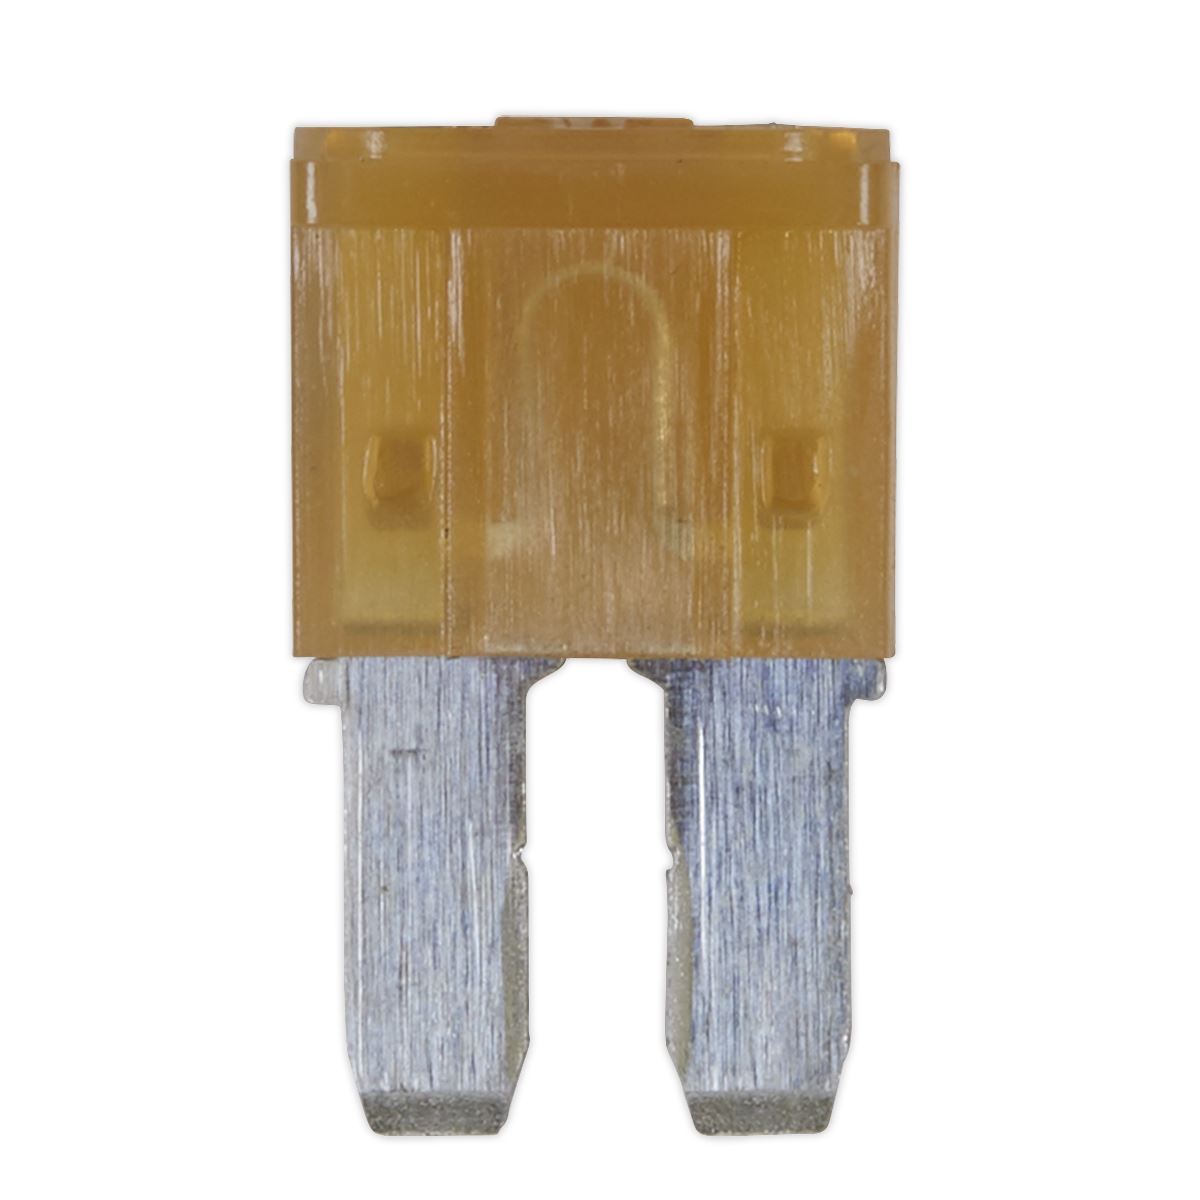 Sealey Automotive MICRO II Blade Fuse 7.5A - Pack of 50